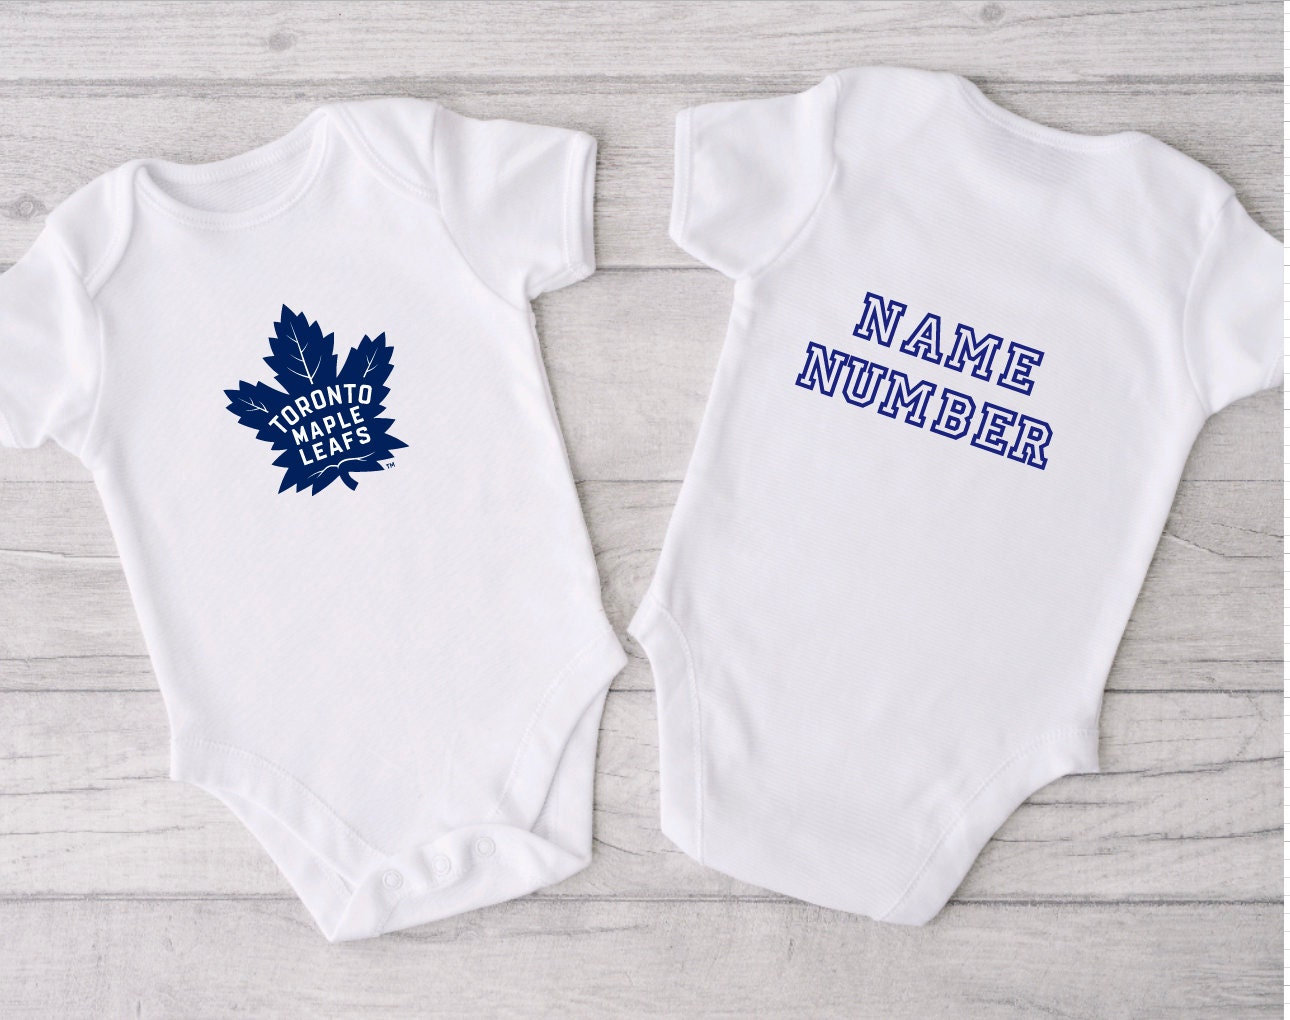 Decided to try my own version of a Leafs OVO style jersey : r/leafs